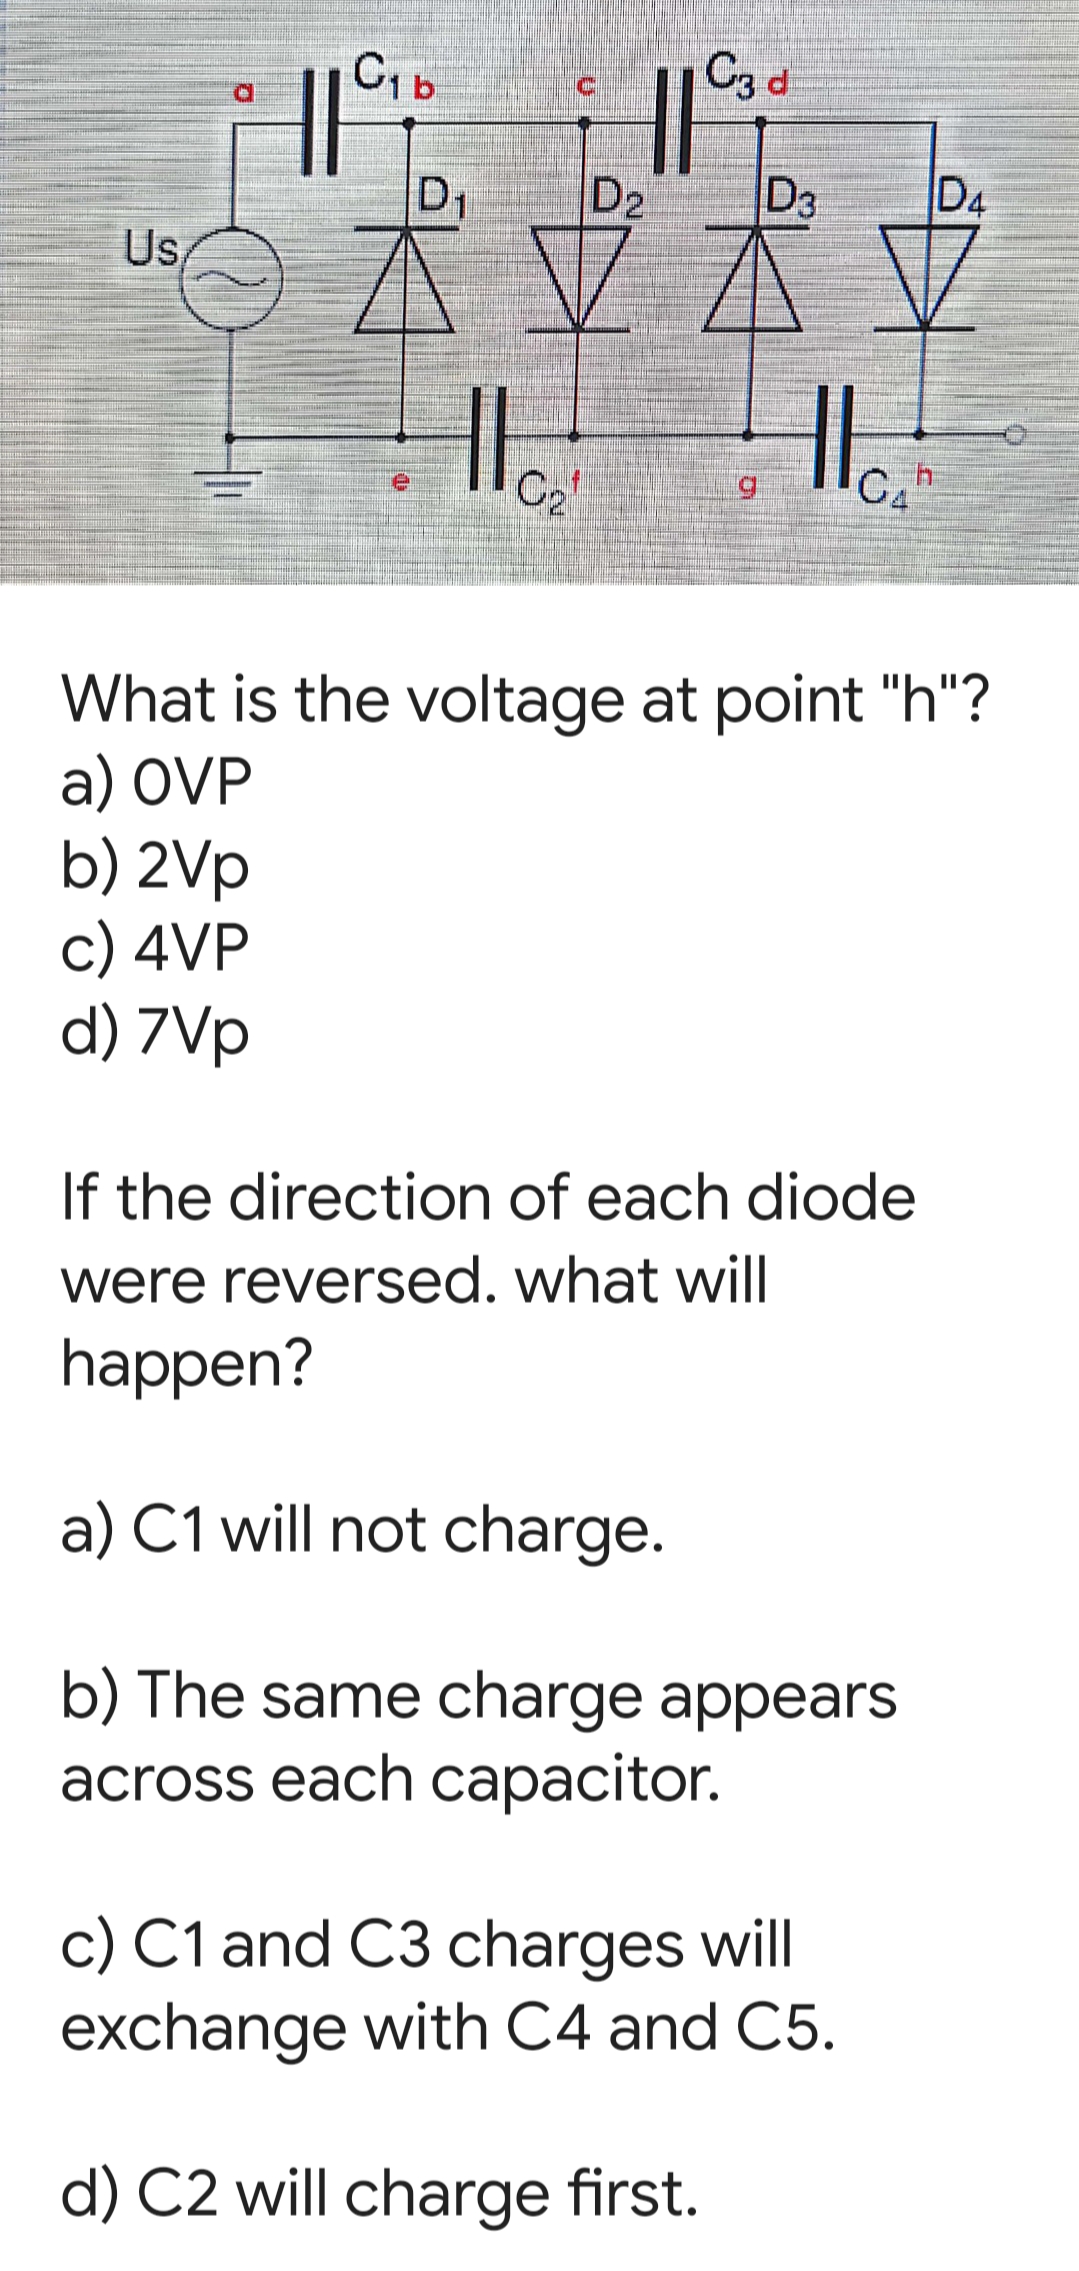 C3 d
D1
D2
D3
D4
U,
C2
C, h
What is the voltage at point "h"?
a) OVP
b) 2Vp
c) 4VP
d) 7Vp
If the direction of each diode
were reversed. what will
happen?
a) C1 will not charge.
b) The same charge appears
across each capacitor.
c) C1 and C3 charges will
exchange with C4 and C5.
d) C2 will charge first.
